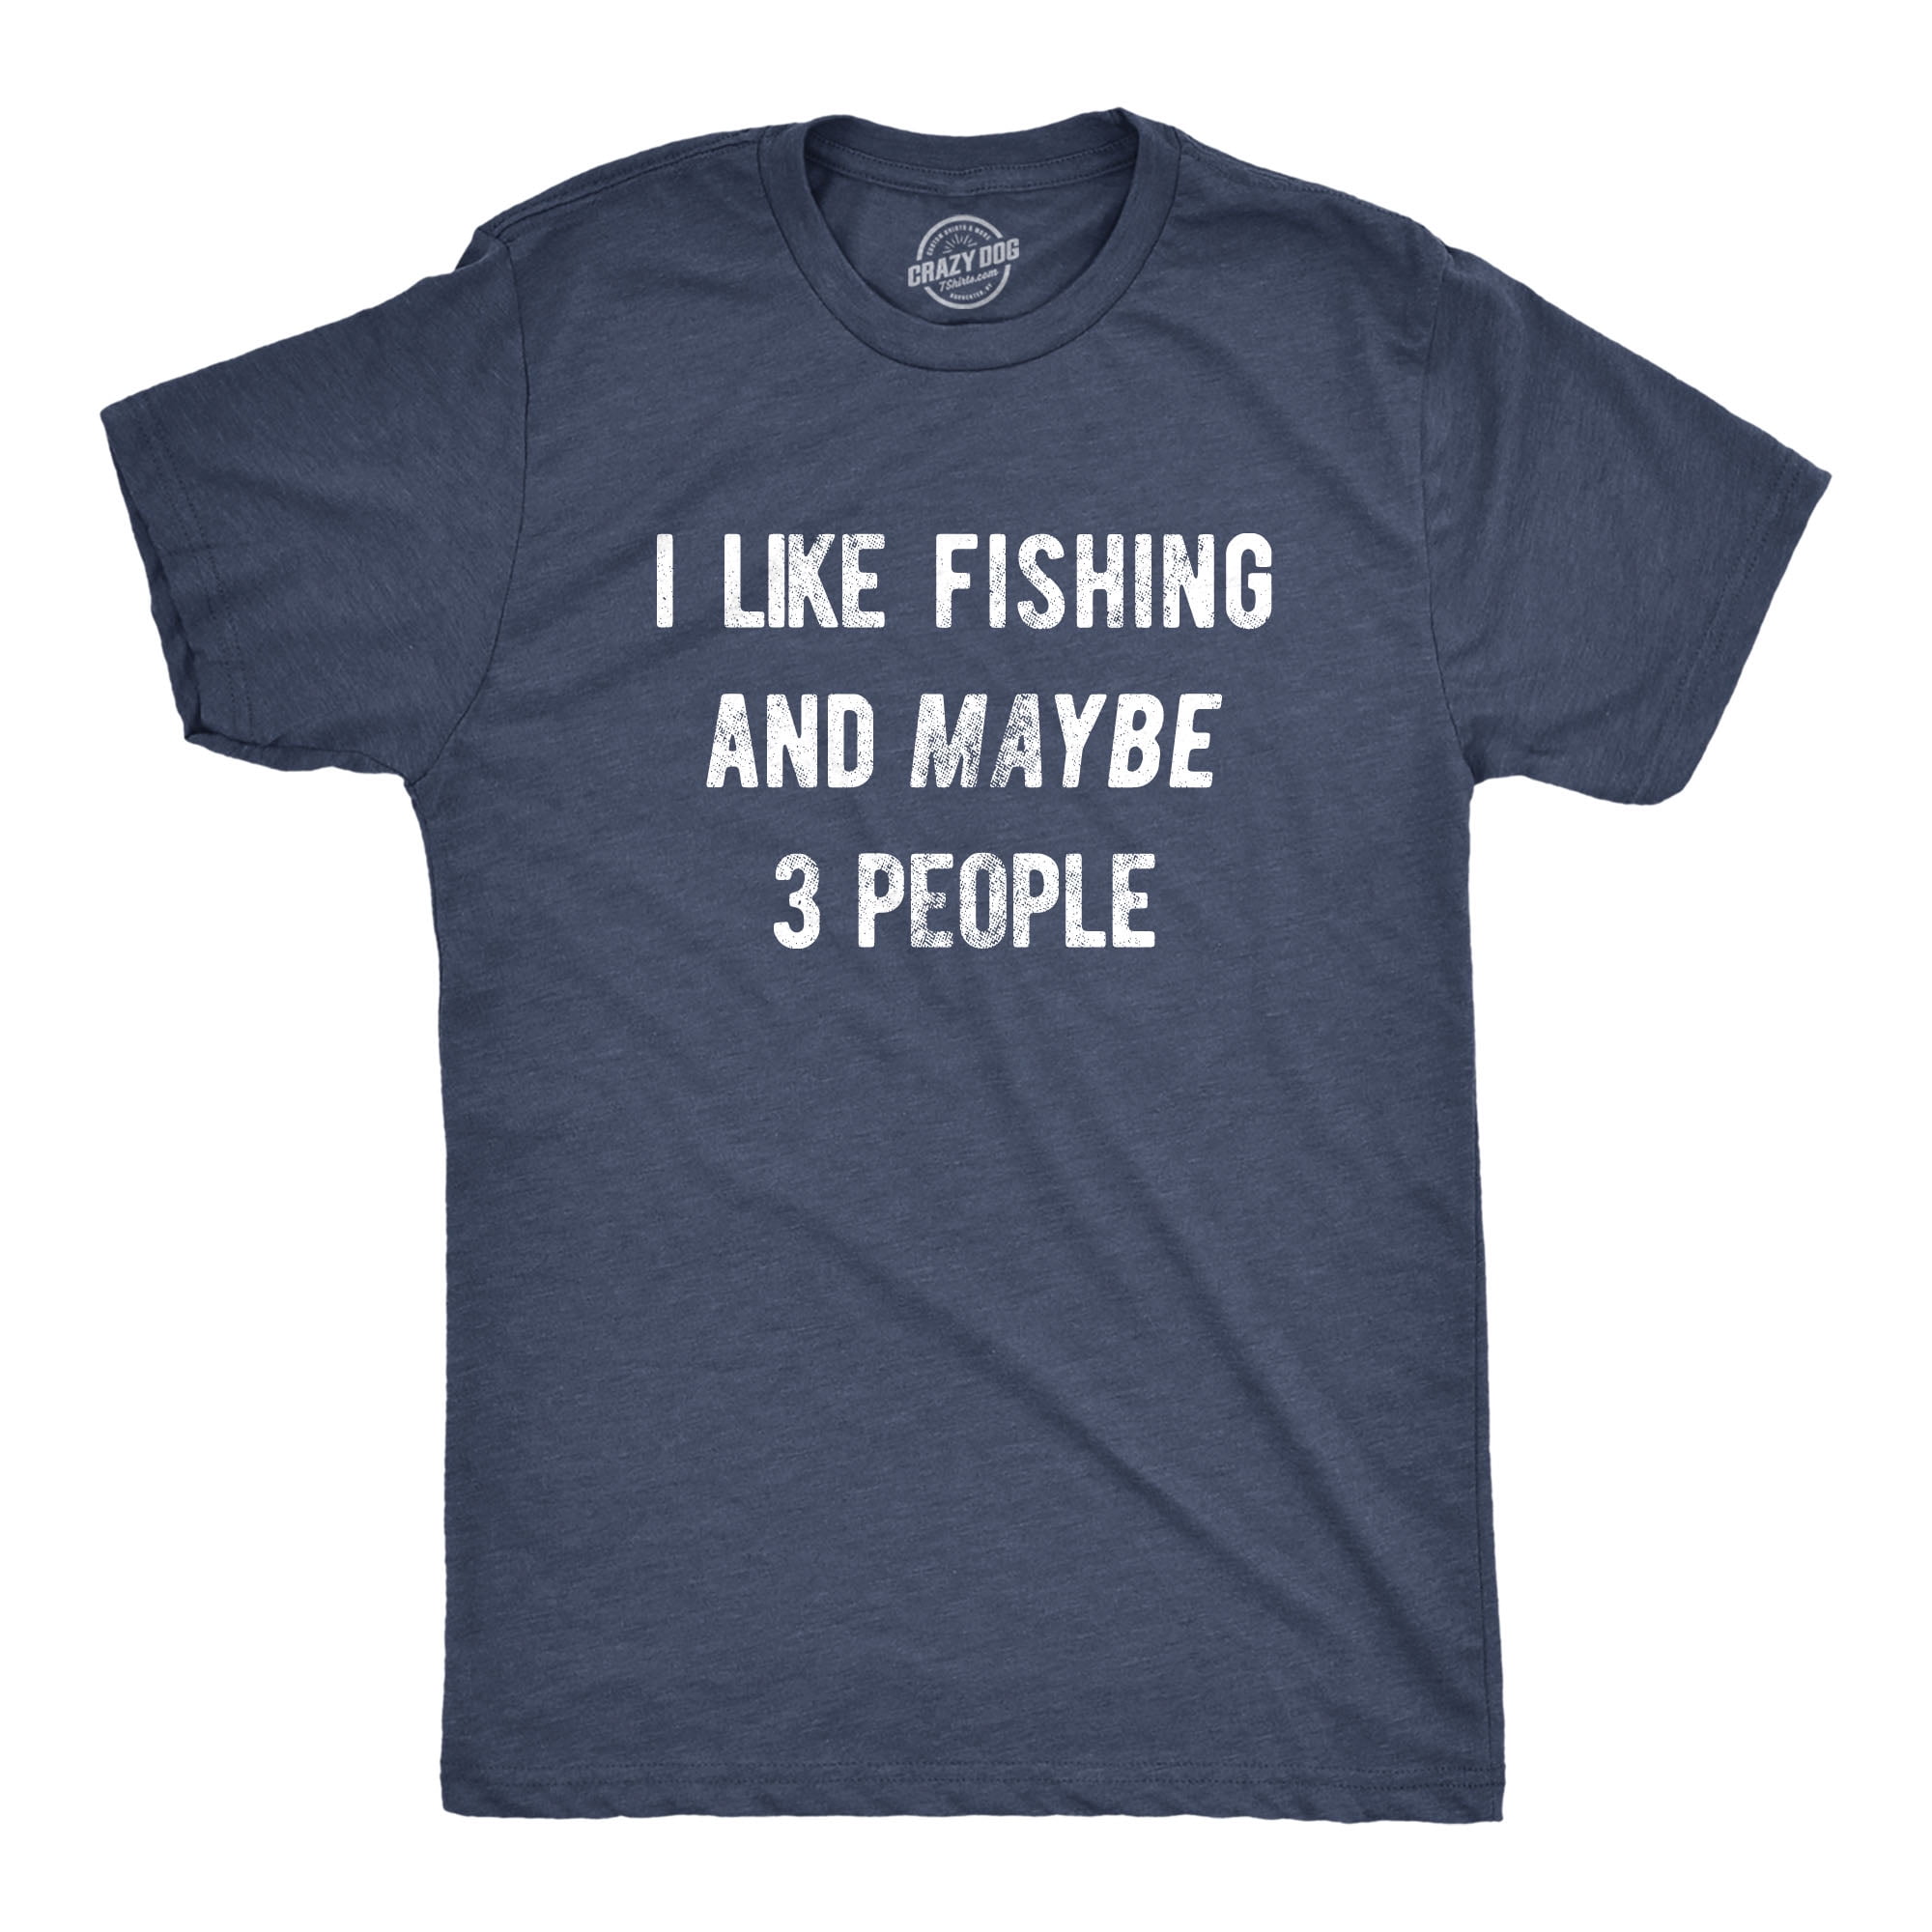 Mens I Like Fishing And Maybe 3 People T shirt Funny Hunting